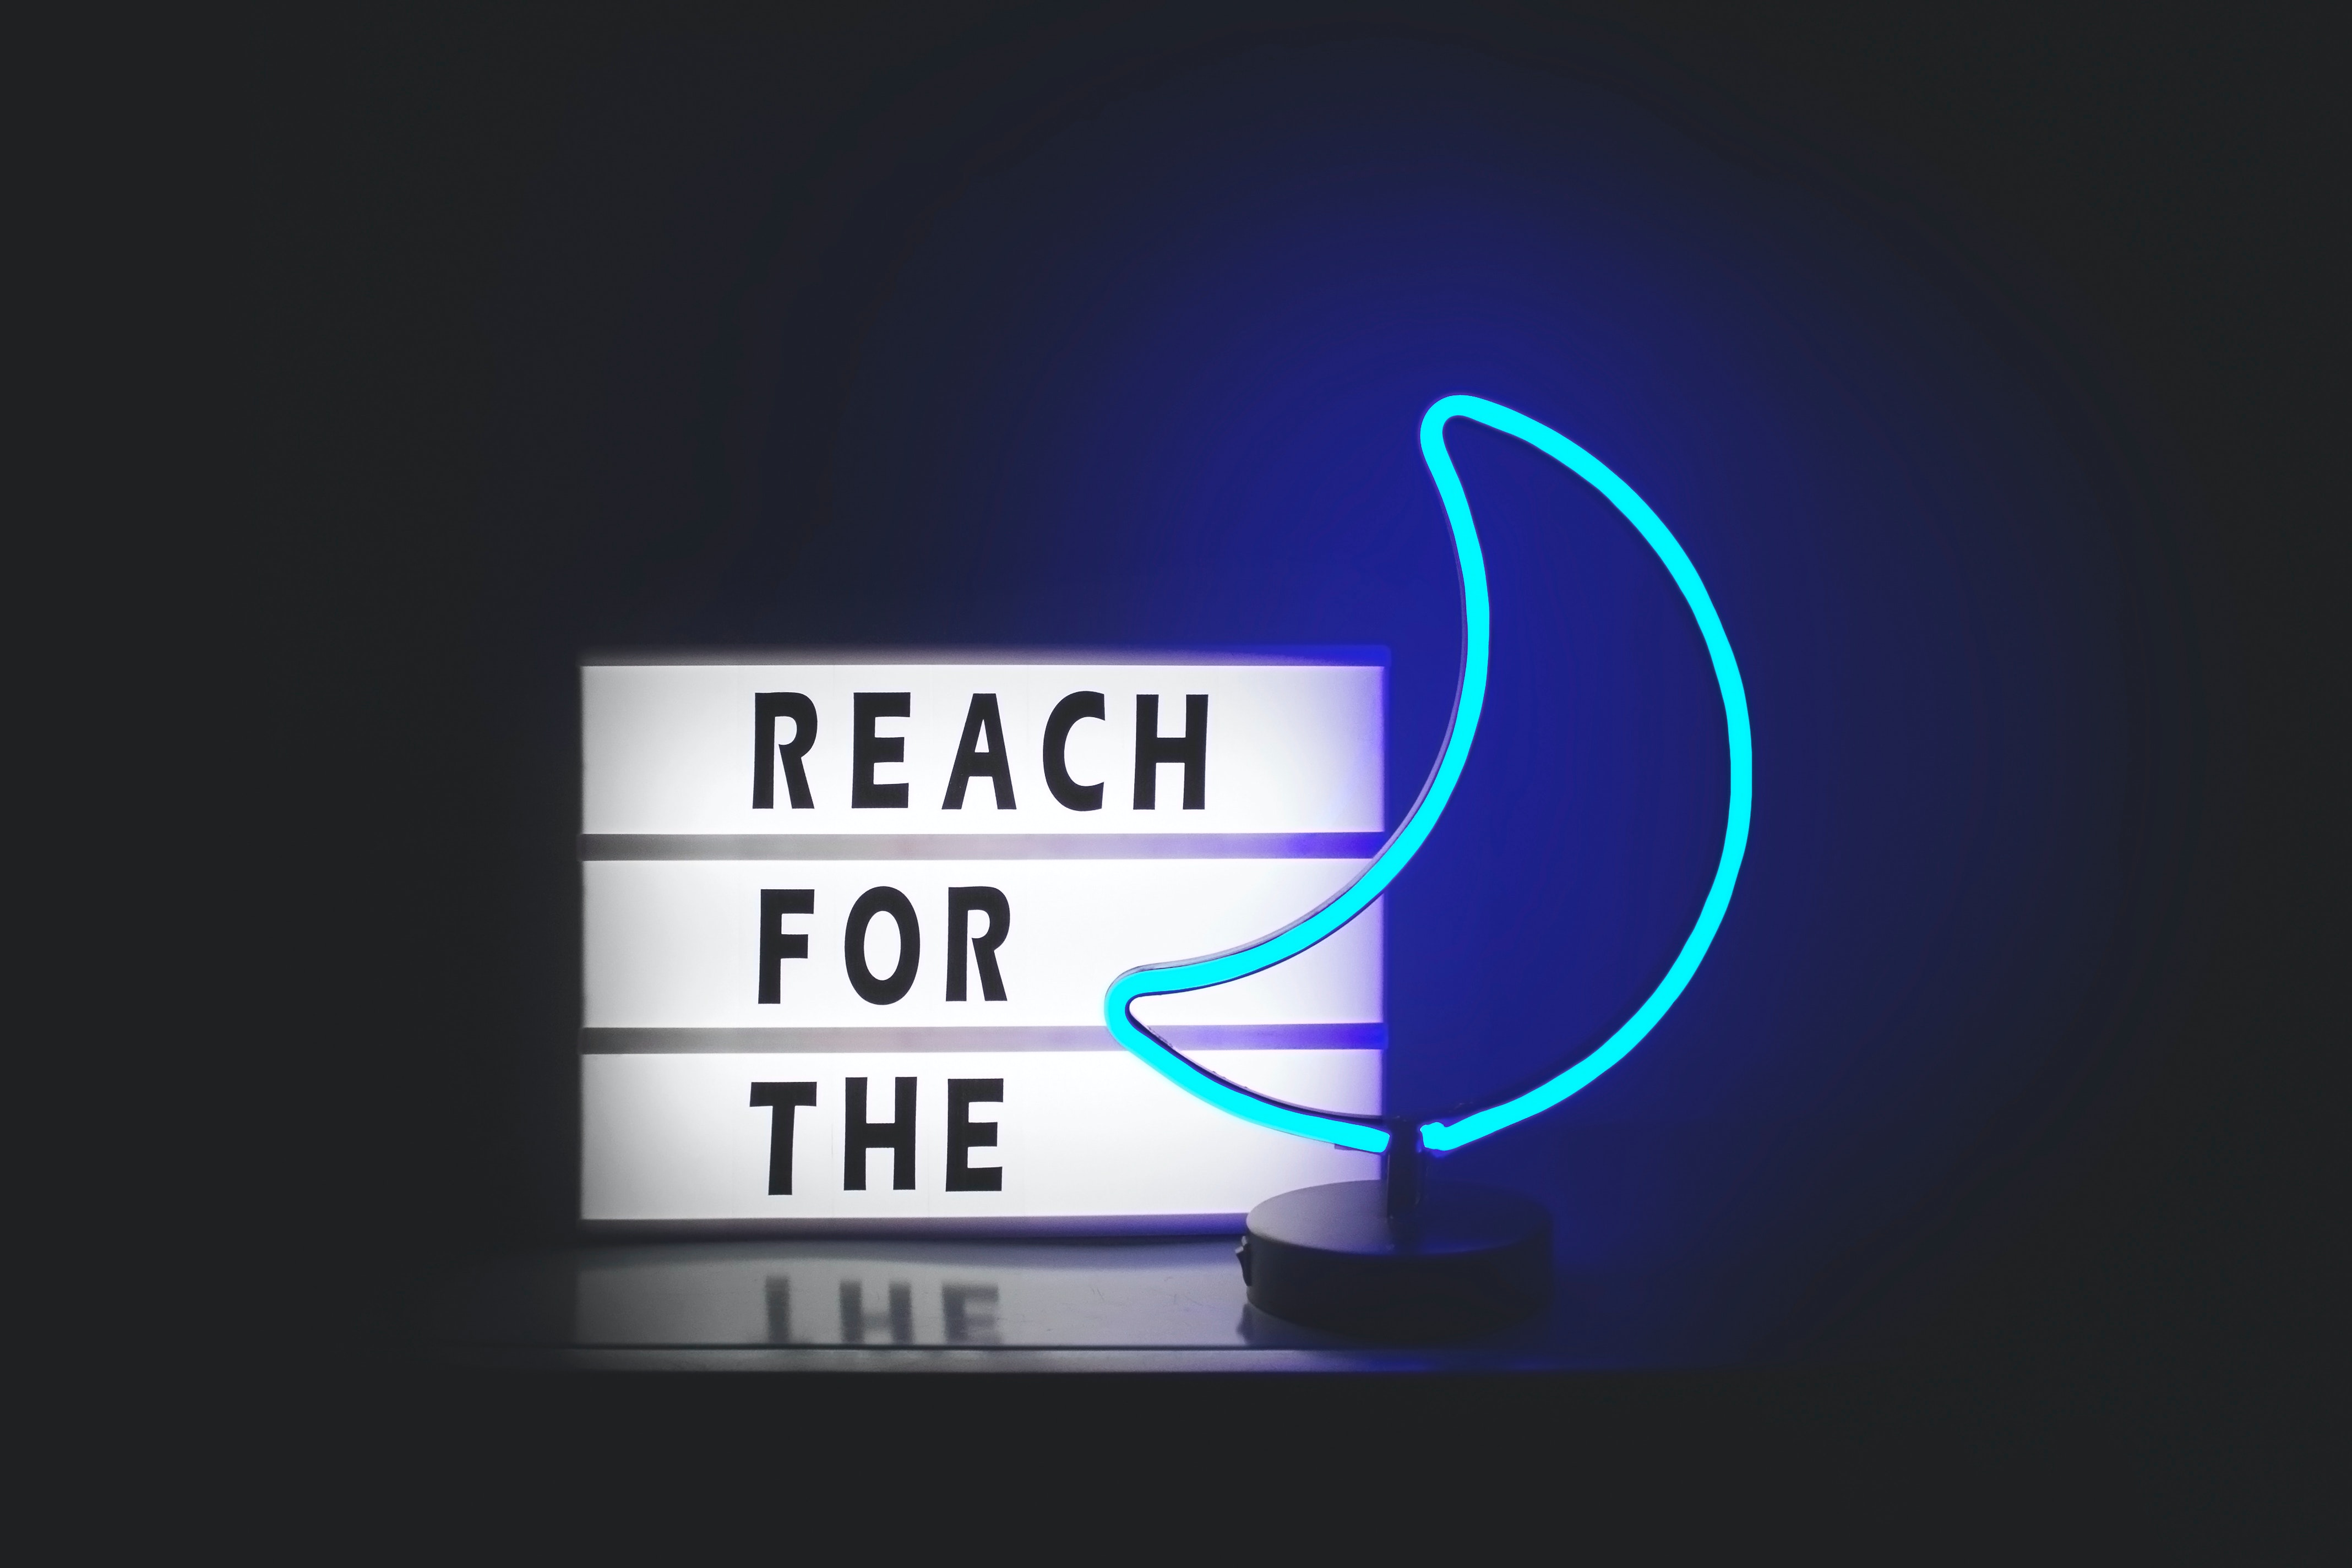 Sign reading 'REACH FOR THE' with a blue neon light in the form of a crescent moon